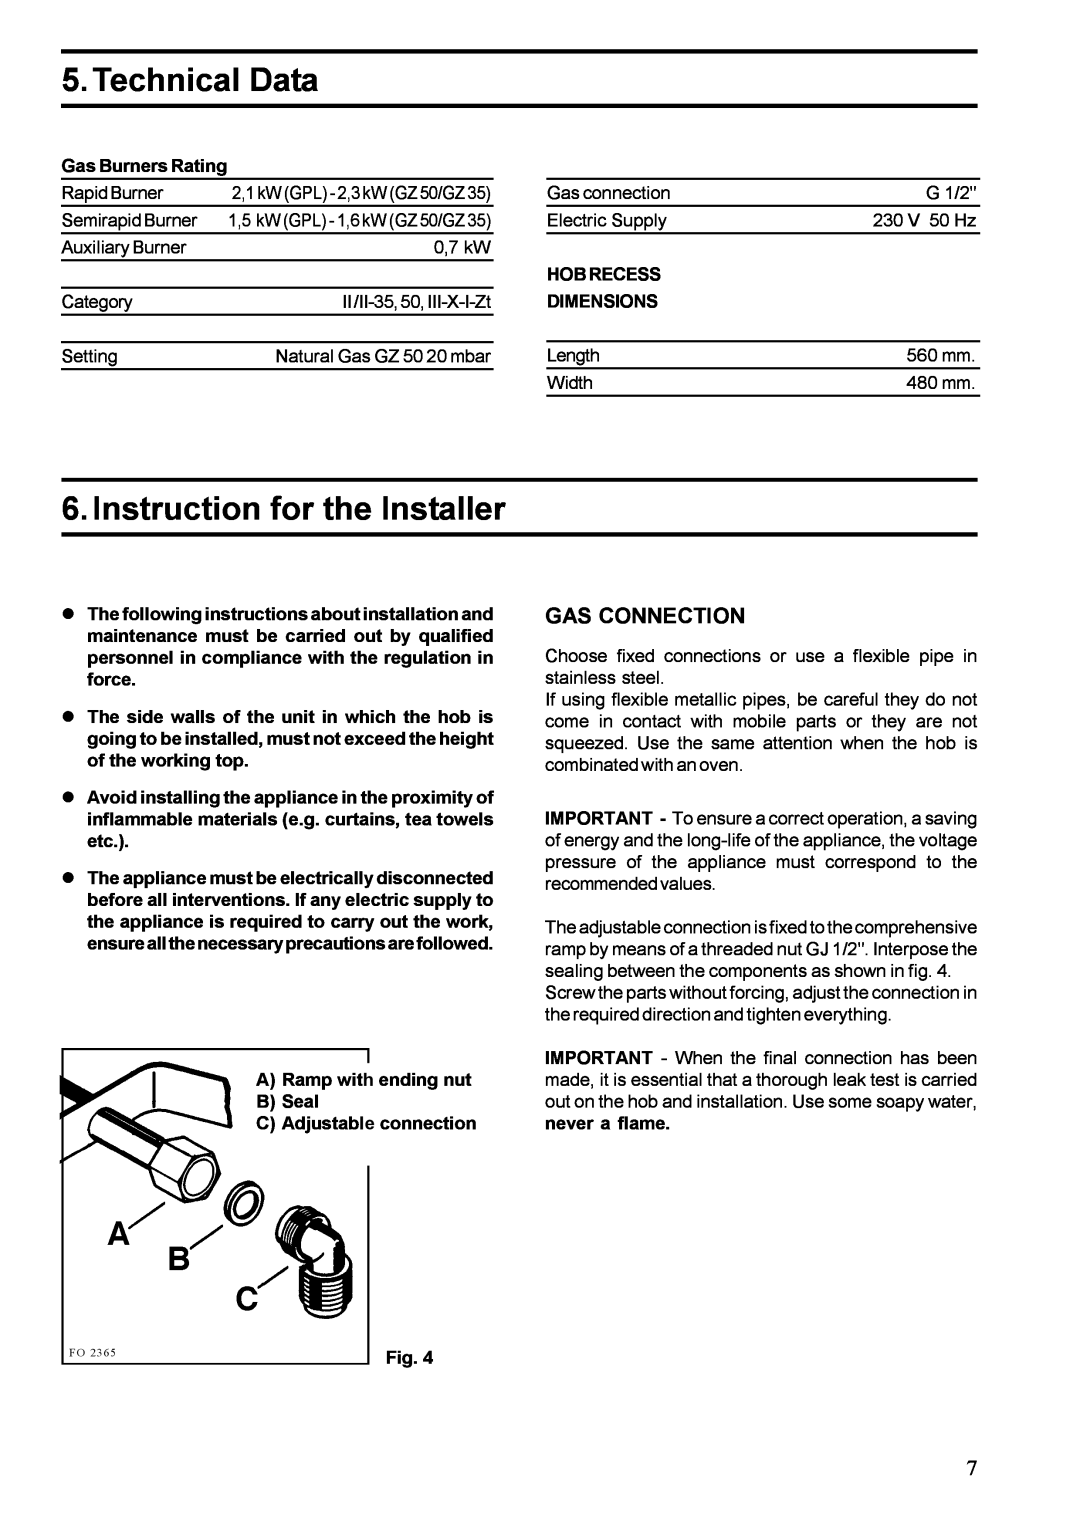 Zanussi ZGF 647 installation manual Technical Data, Instruction for the Installer, Gas Connection 